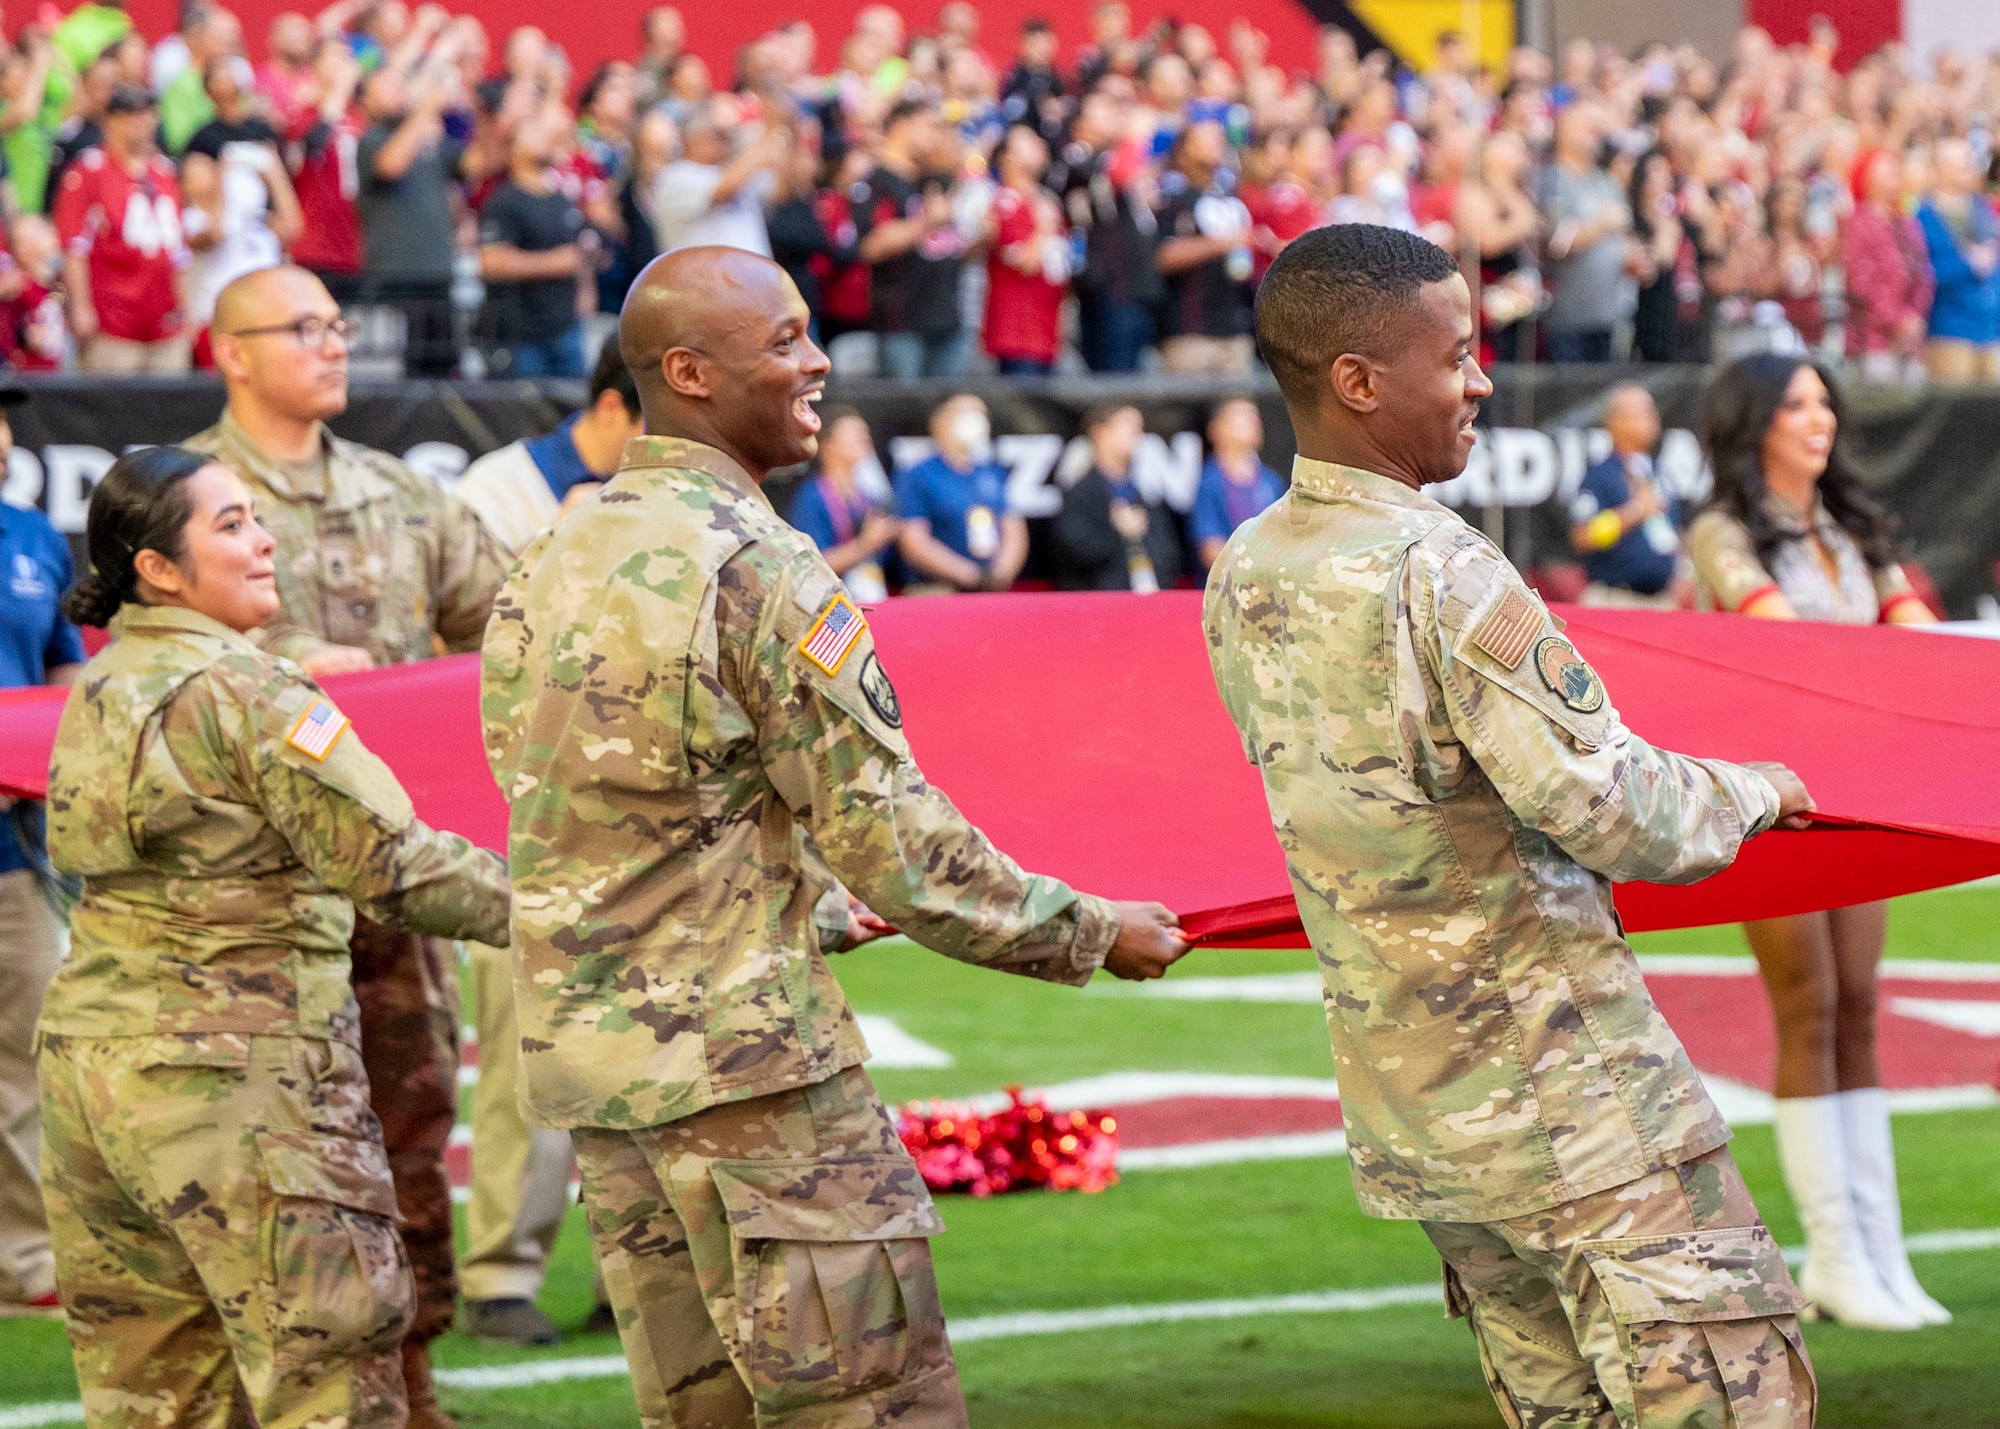 U.S. Air Force Airmen assigned to the 56th Fighter Wing and U.S. Army Soldiers from the Phoenix Recruiting Battalion unfurl the U.S. flag for the Arizona Cardinals Salute to Service event Nov. 6, 2022, at State Farm Stadium, Glendale, Arizona.